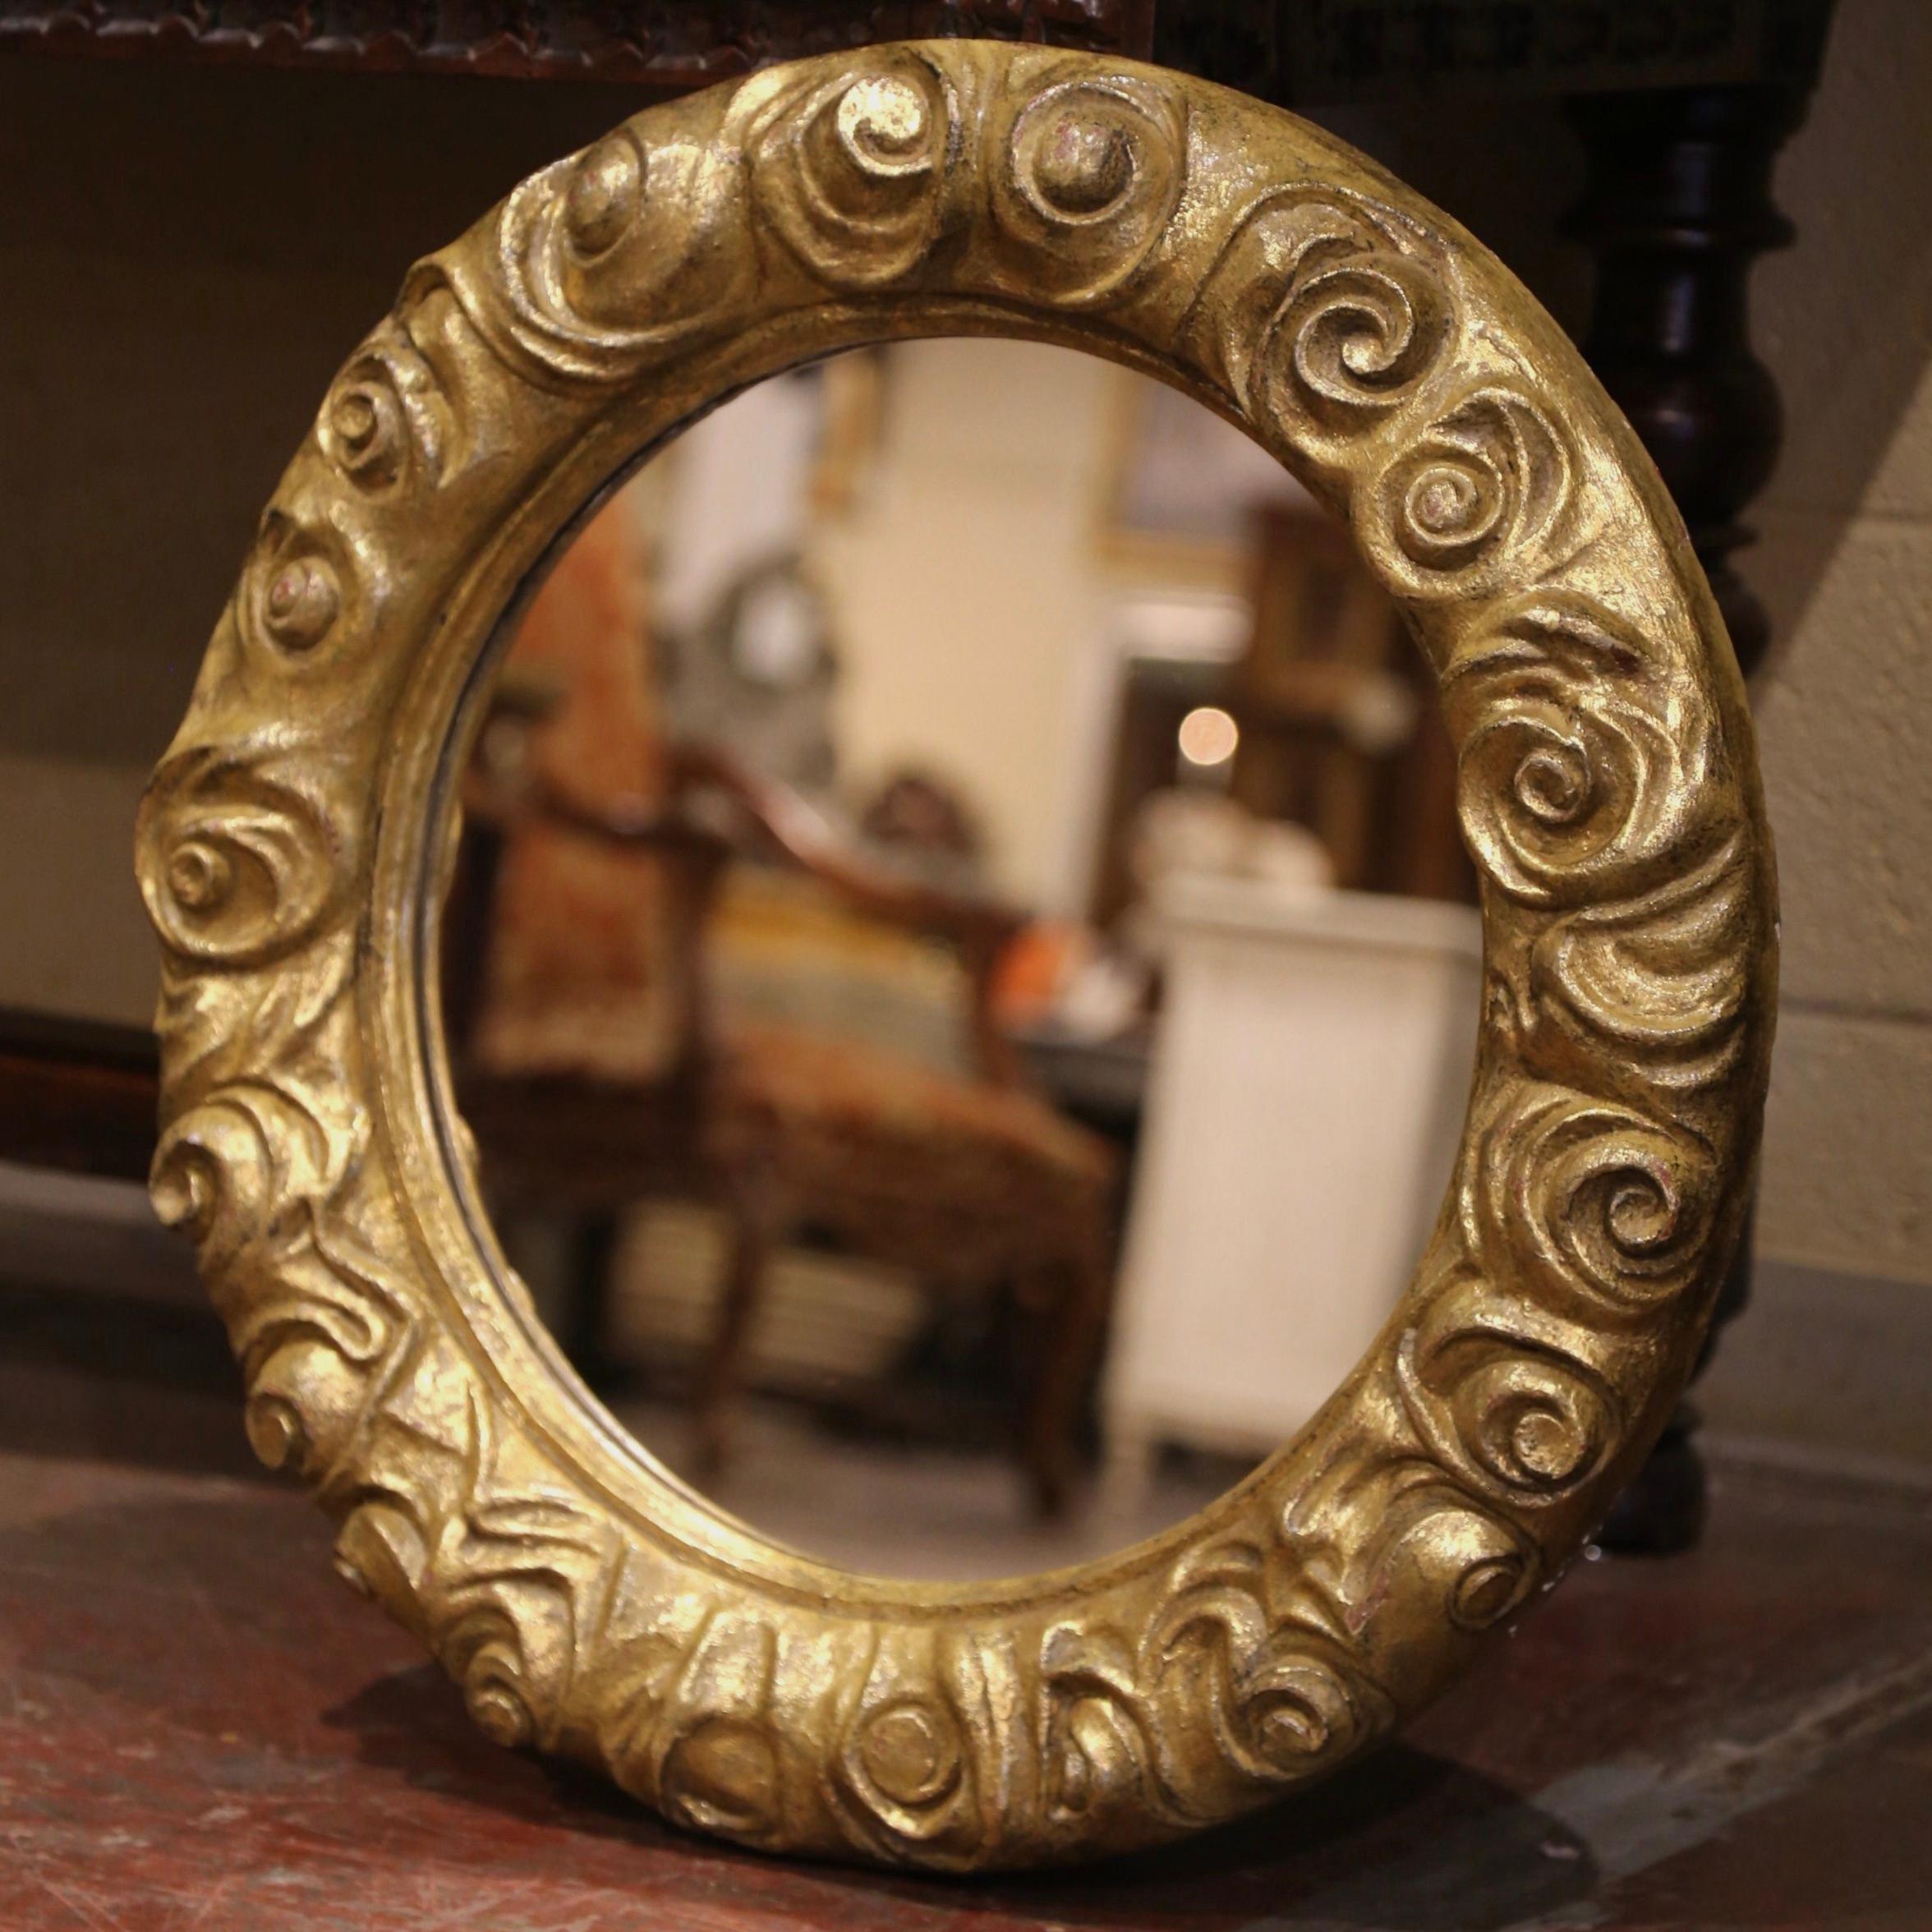 Create a focal point in any room with this gleaming antique wall mirror. Hand carved in France circa 1960, and round in shape, the mirror is decorated with carved rose and flower motifs in high relief. The piece has a shape and shimmering texture